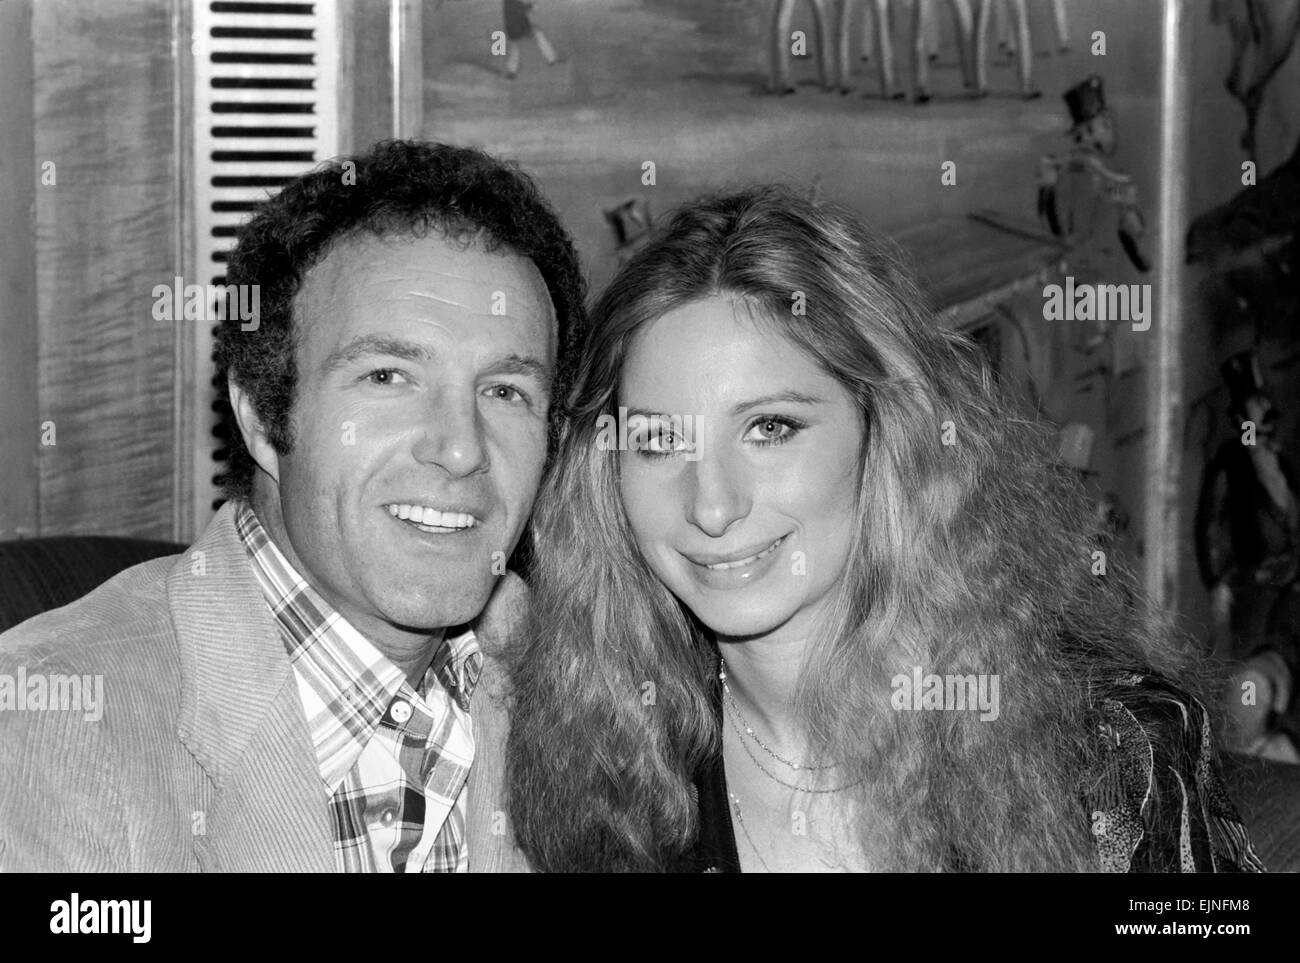 A Press Conference was held today at the Dorchester Hotel in London in which Barbara Streisand and James Caan, the stars of the Royal Performance film 'Funny Lady' were present. 16th March 1975. Stock Photo